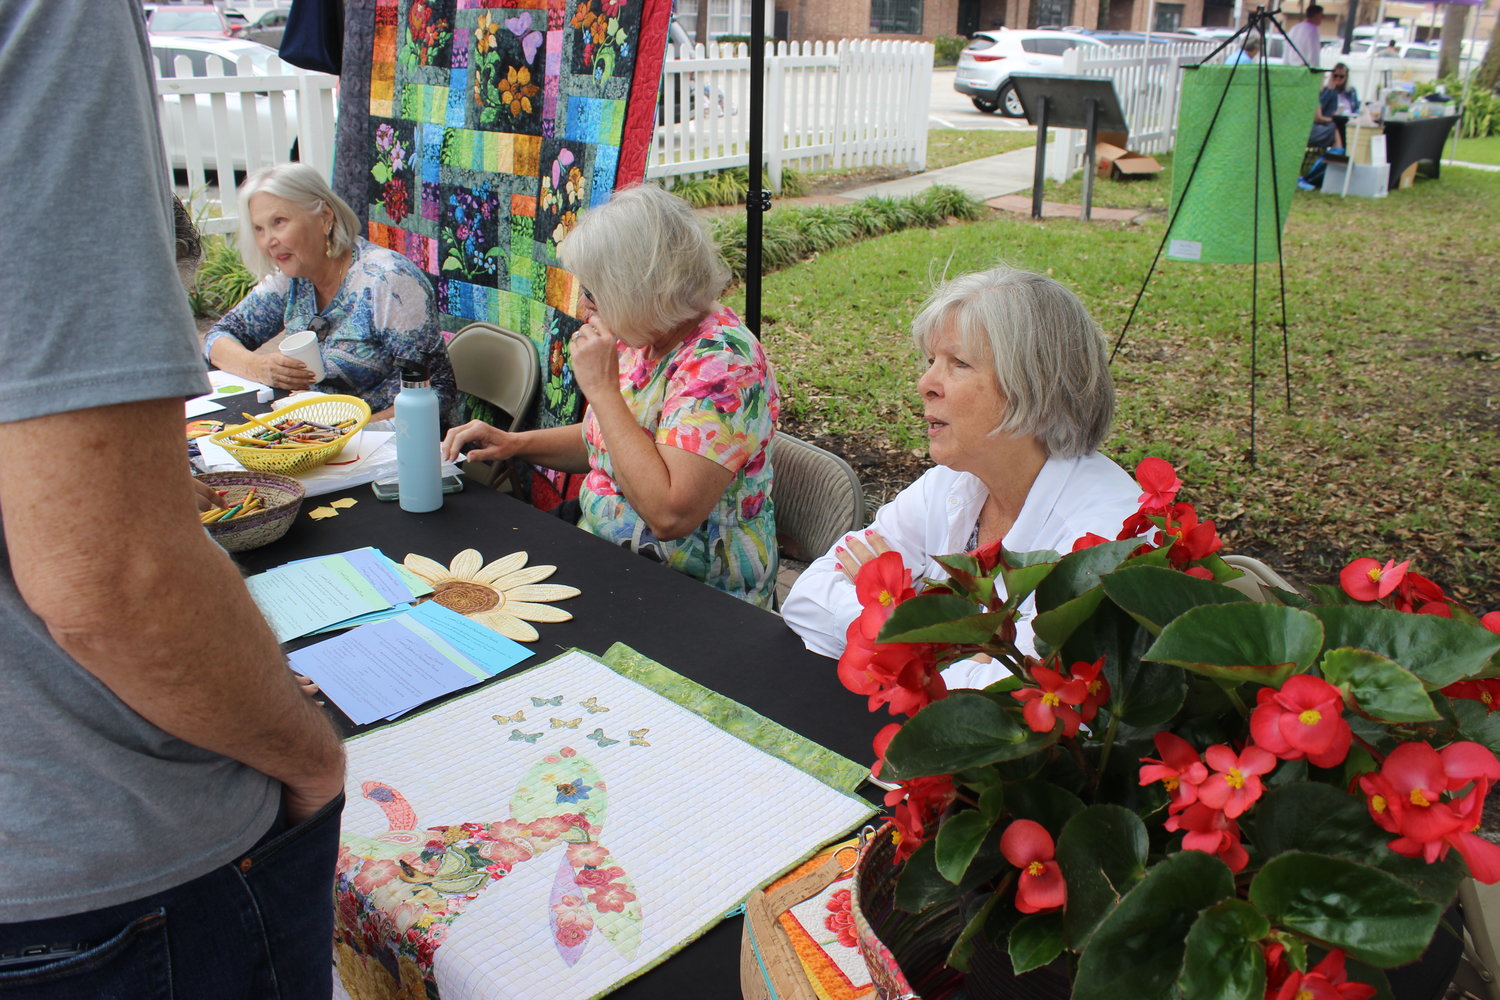 Members of the Coastal Quilters of Northeast Florida were at the Beaches Museum’s “Springing the Blooms” event to speak to visitors about their hobby and their group in Atlantic Beach.